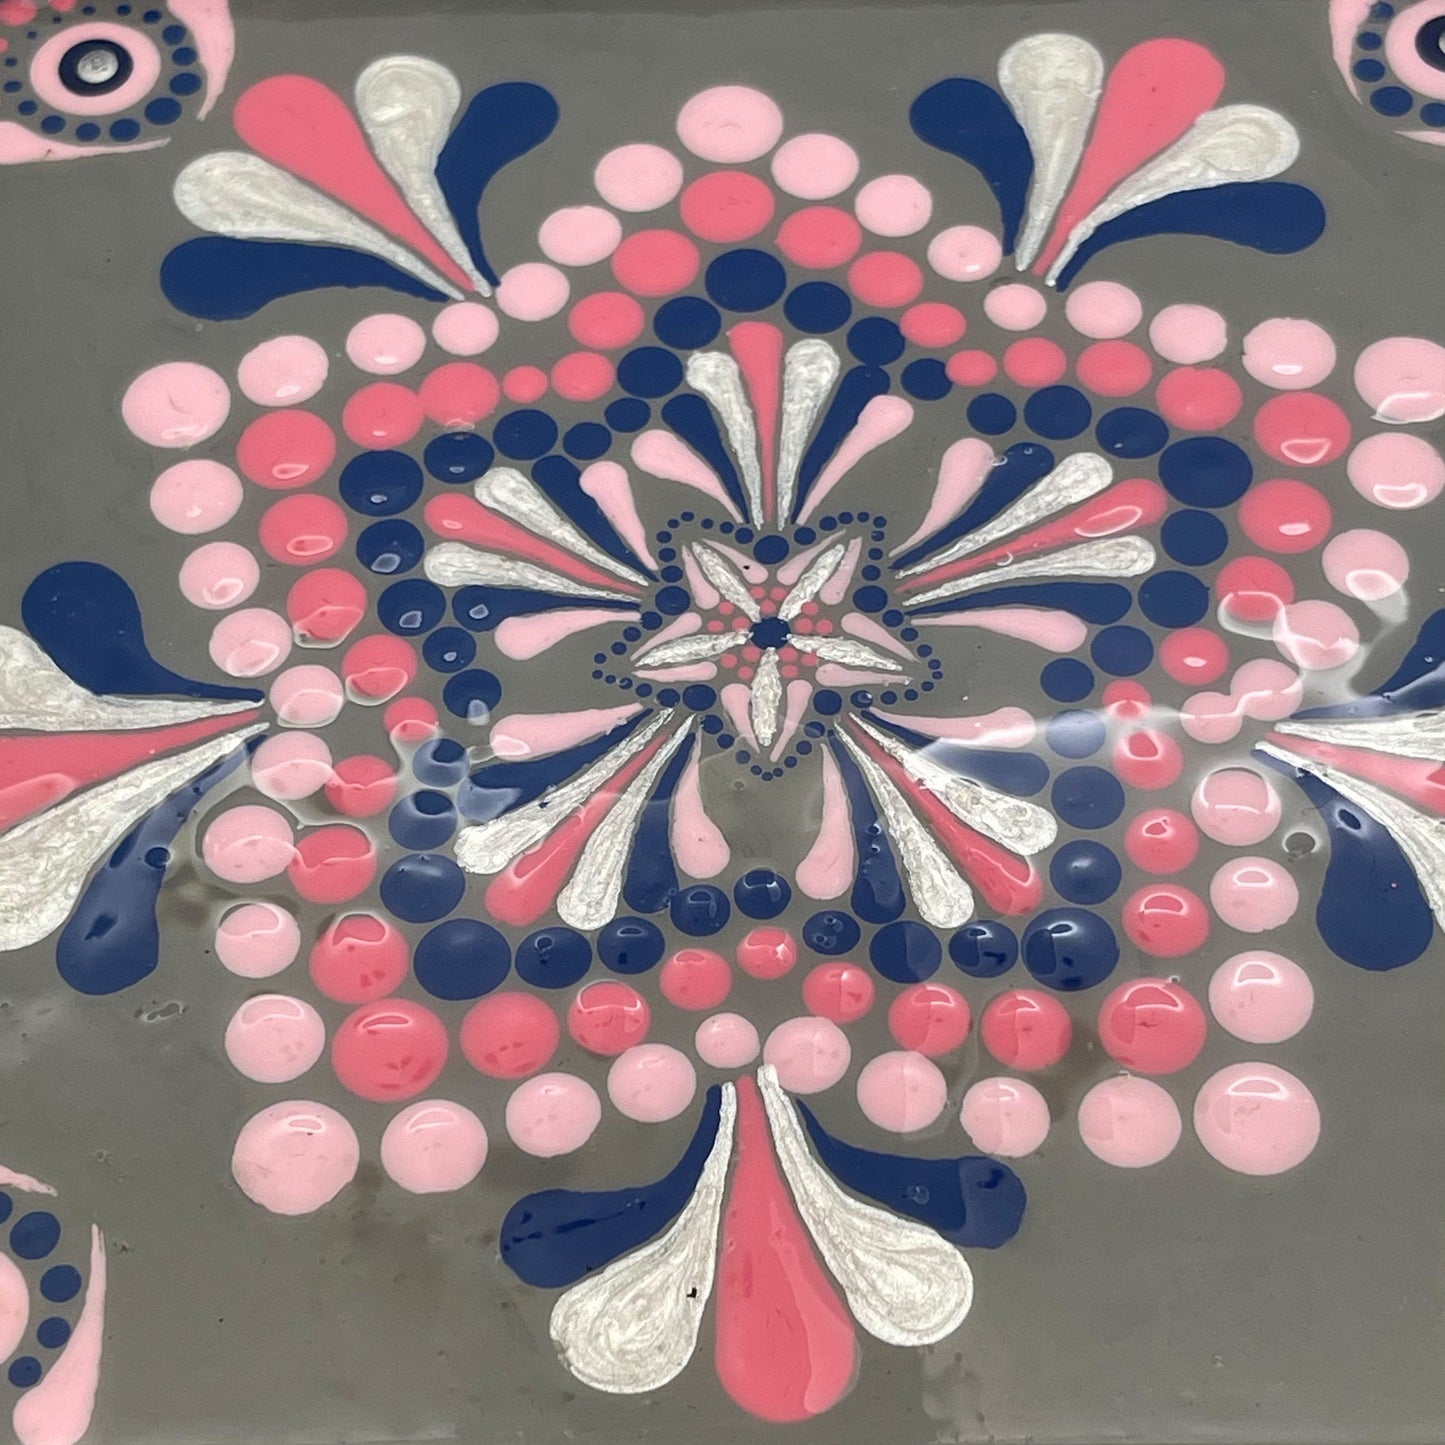 Hand-painted Serving Tray